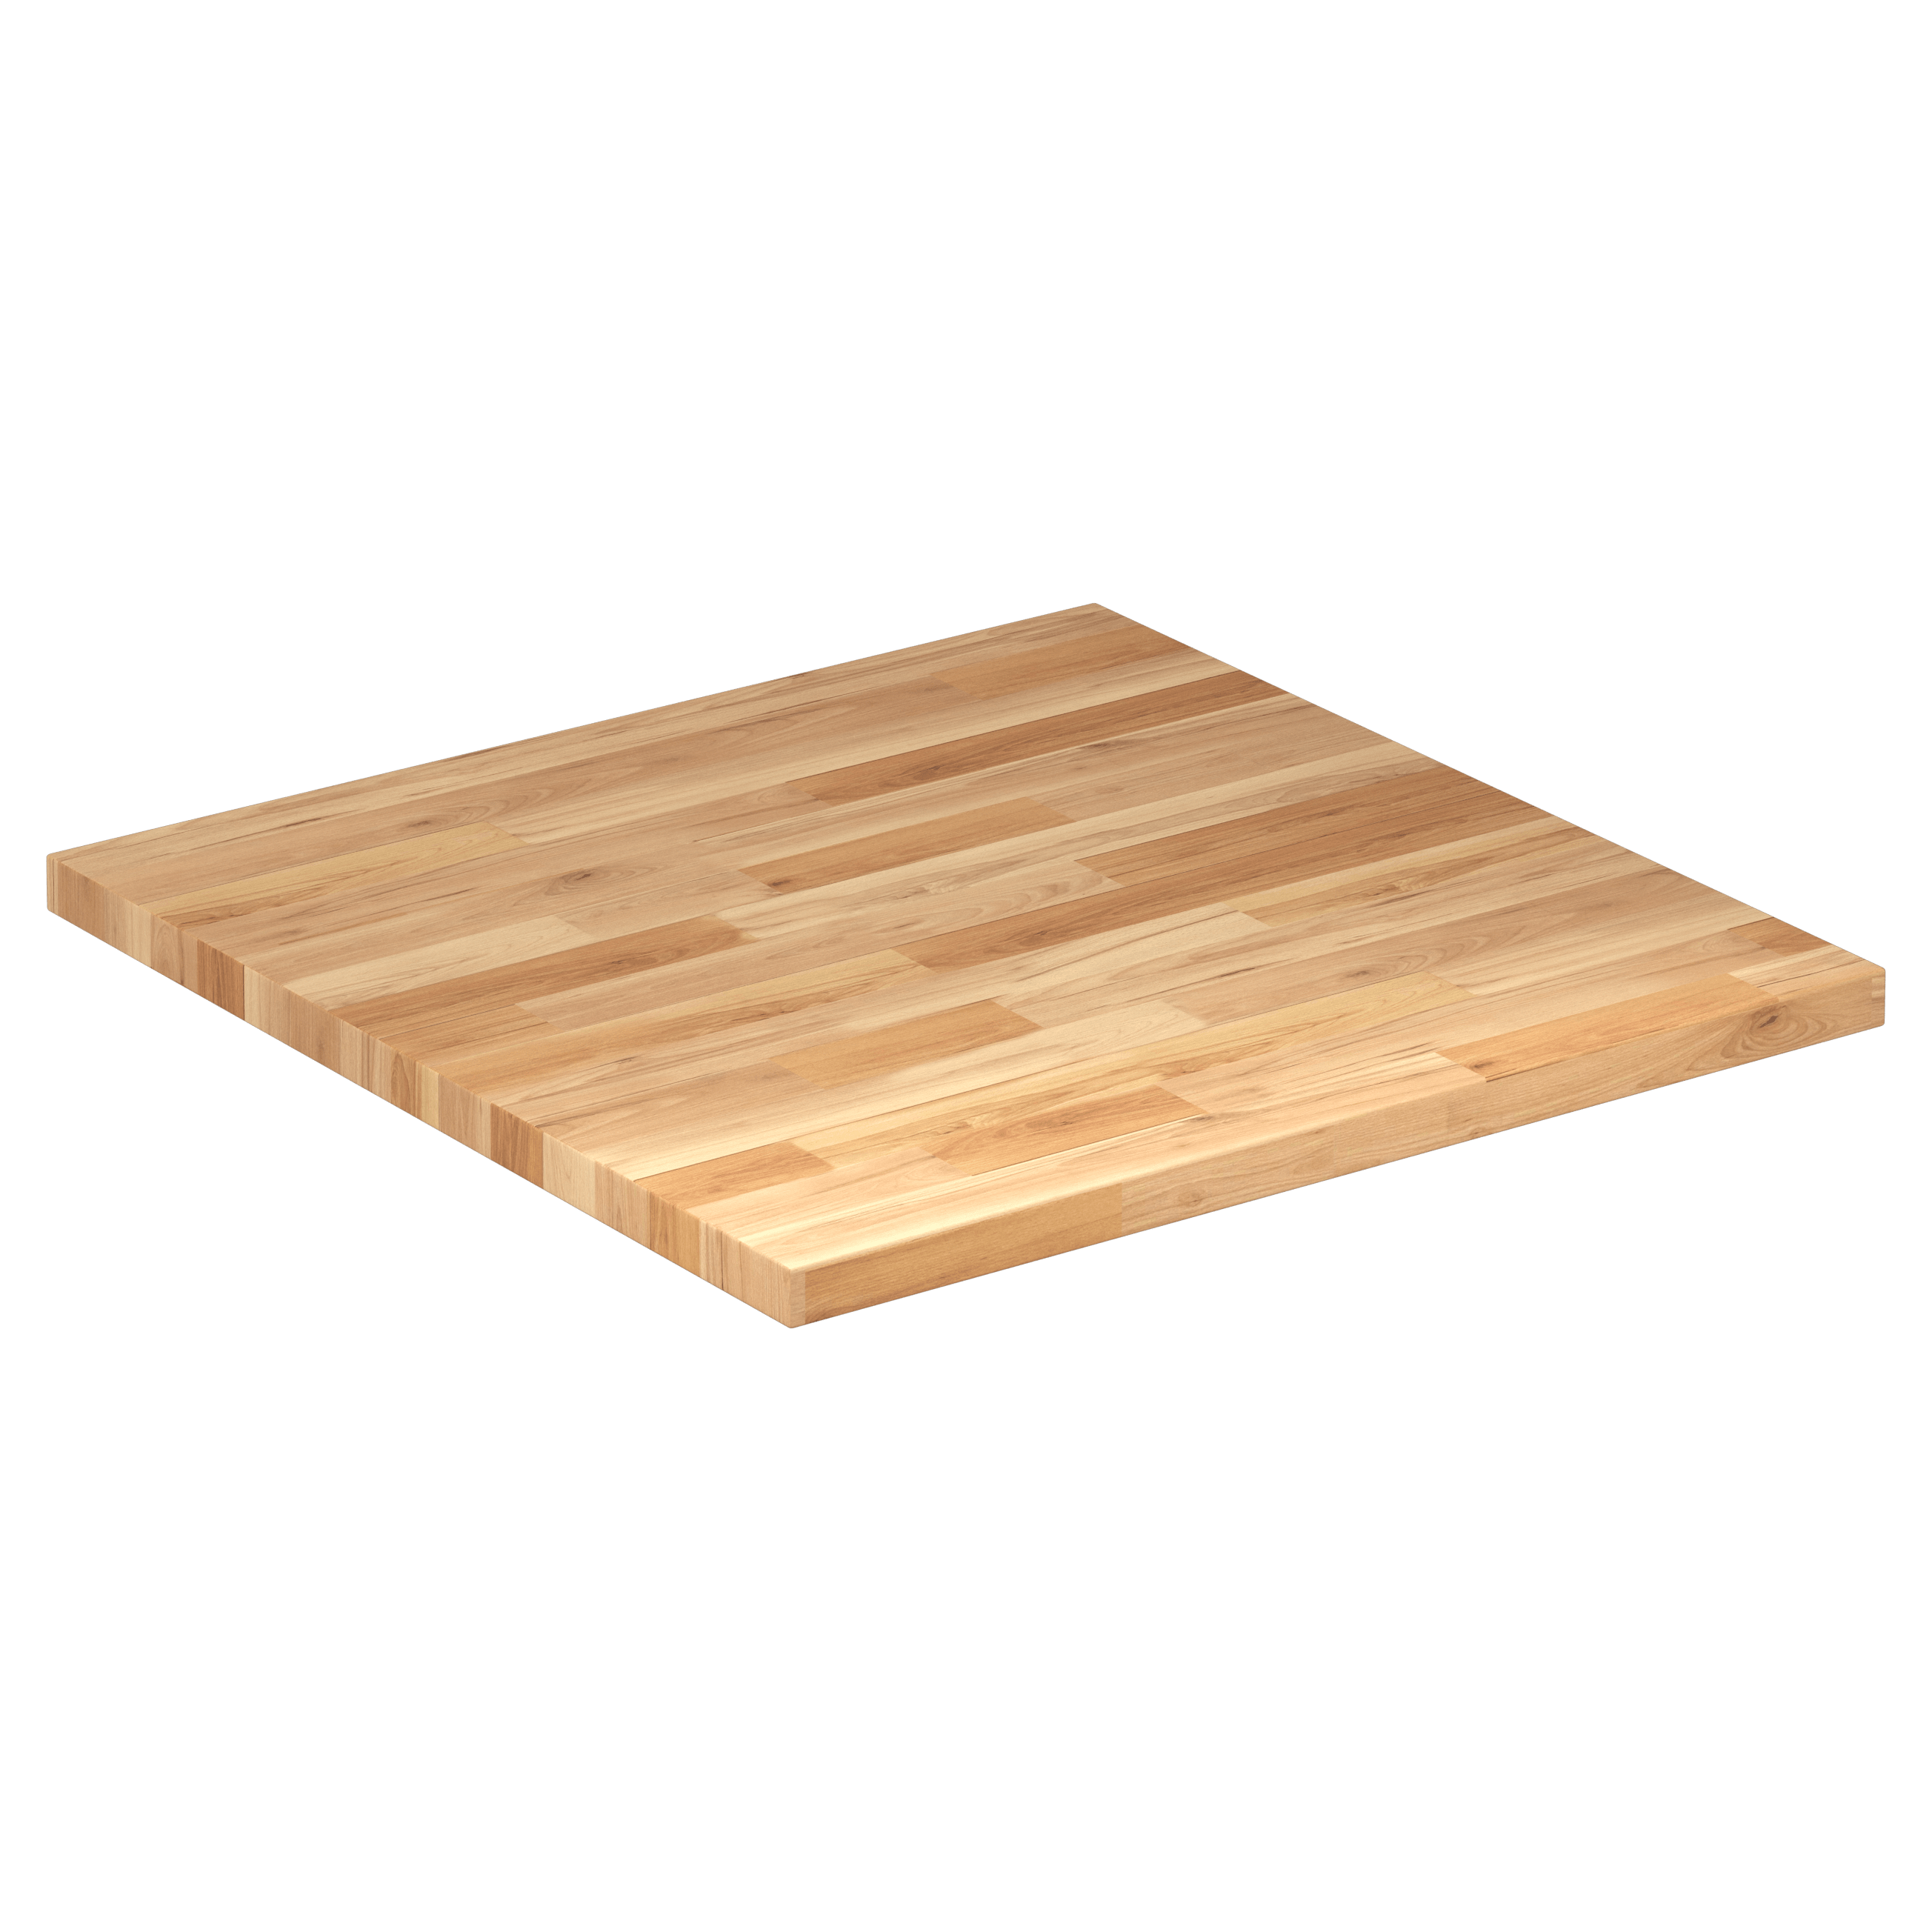 Hardwood Cutting Boards - Liberty Tabletop - Made in the USA